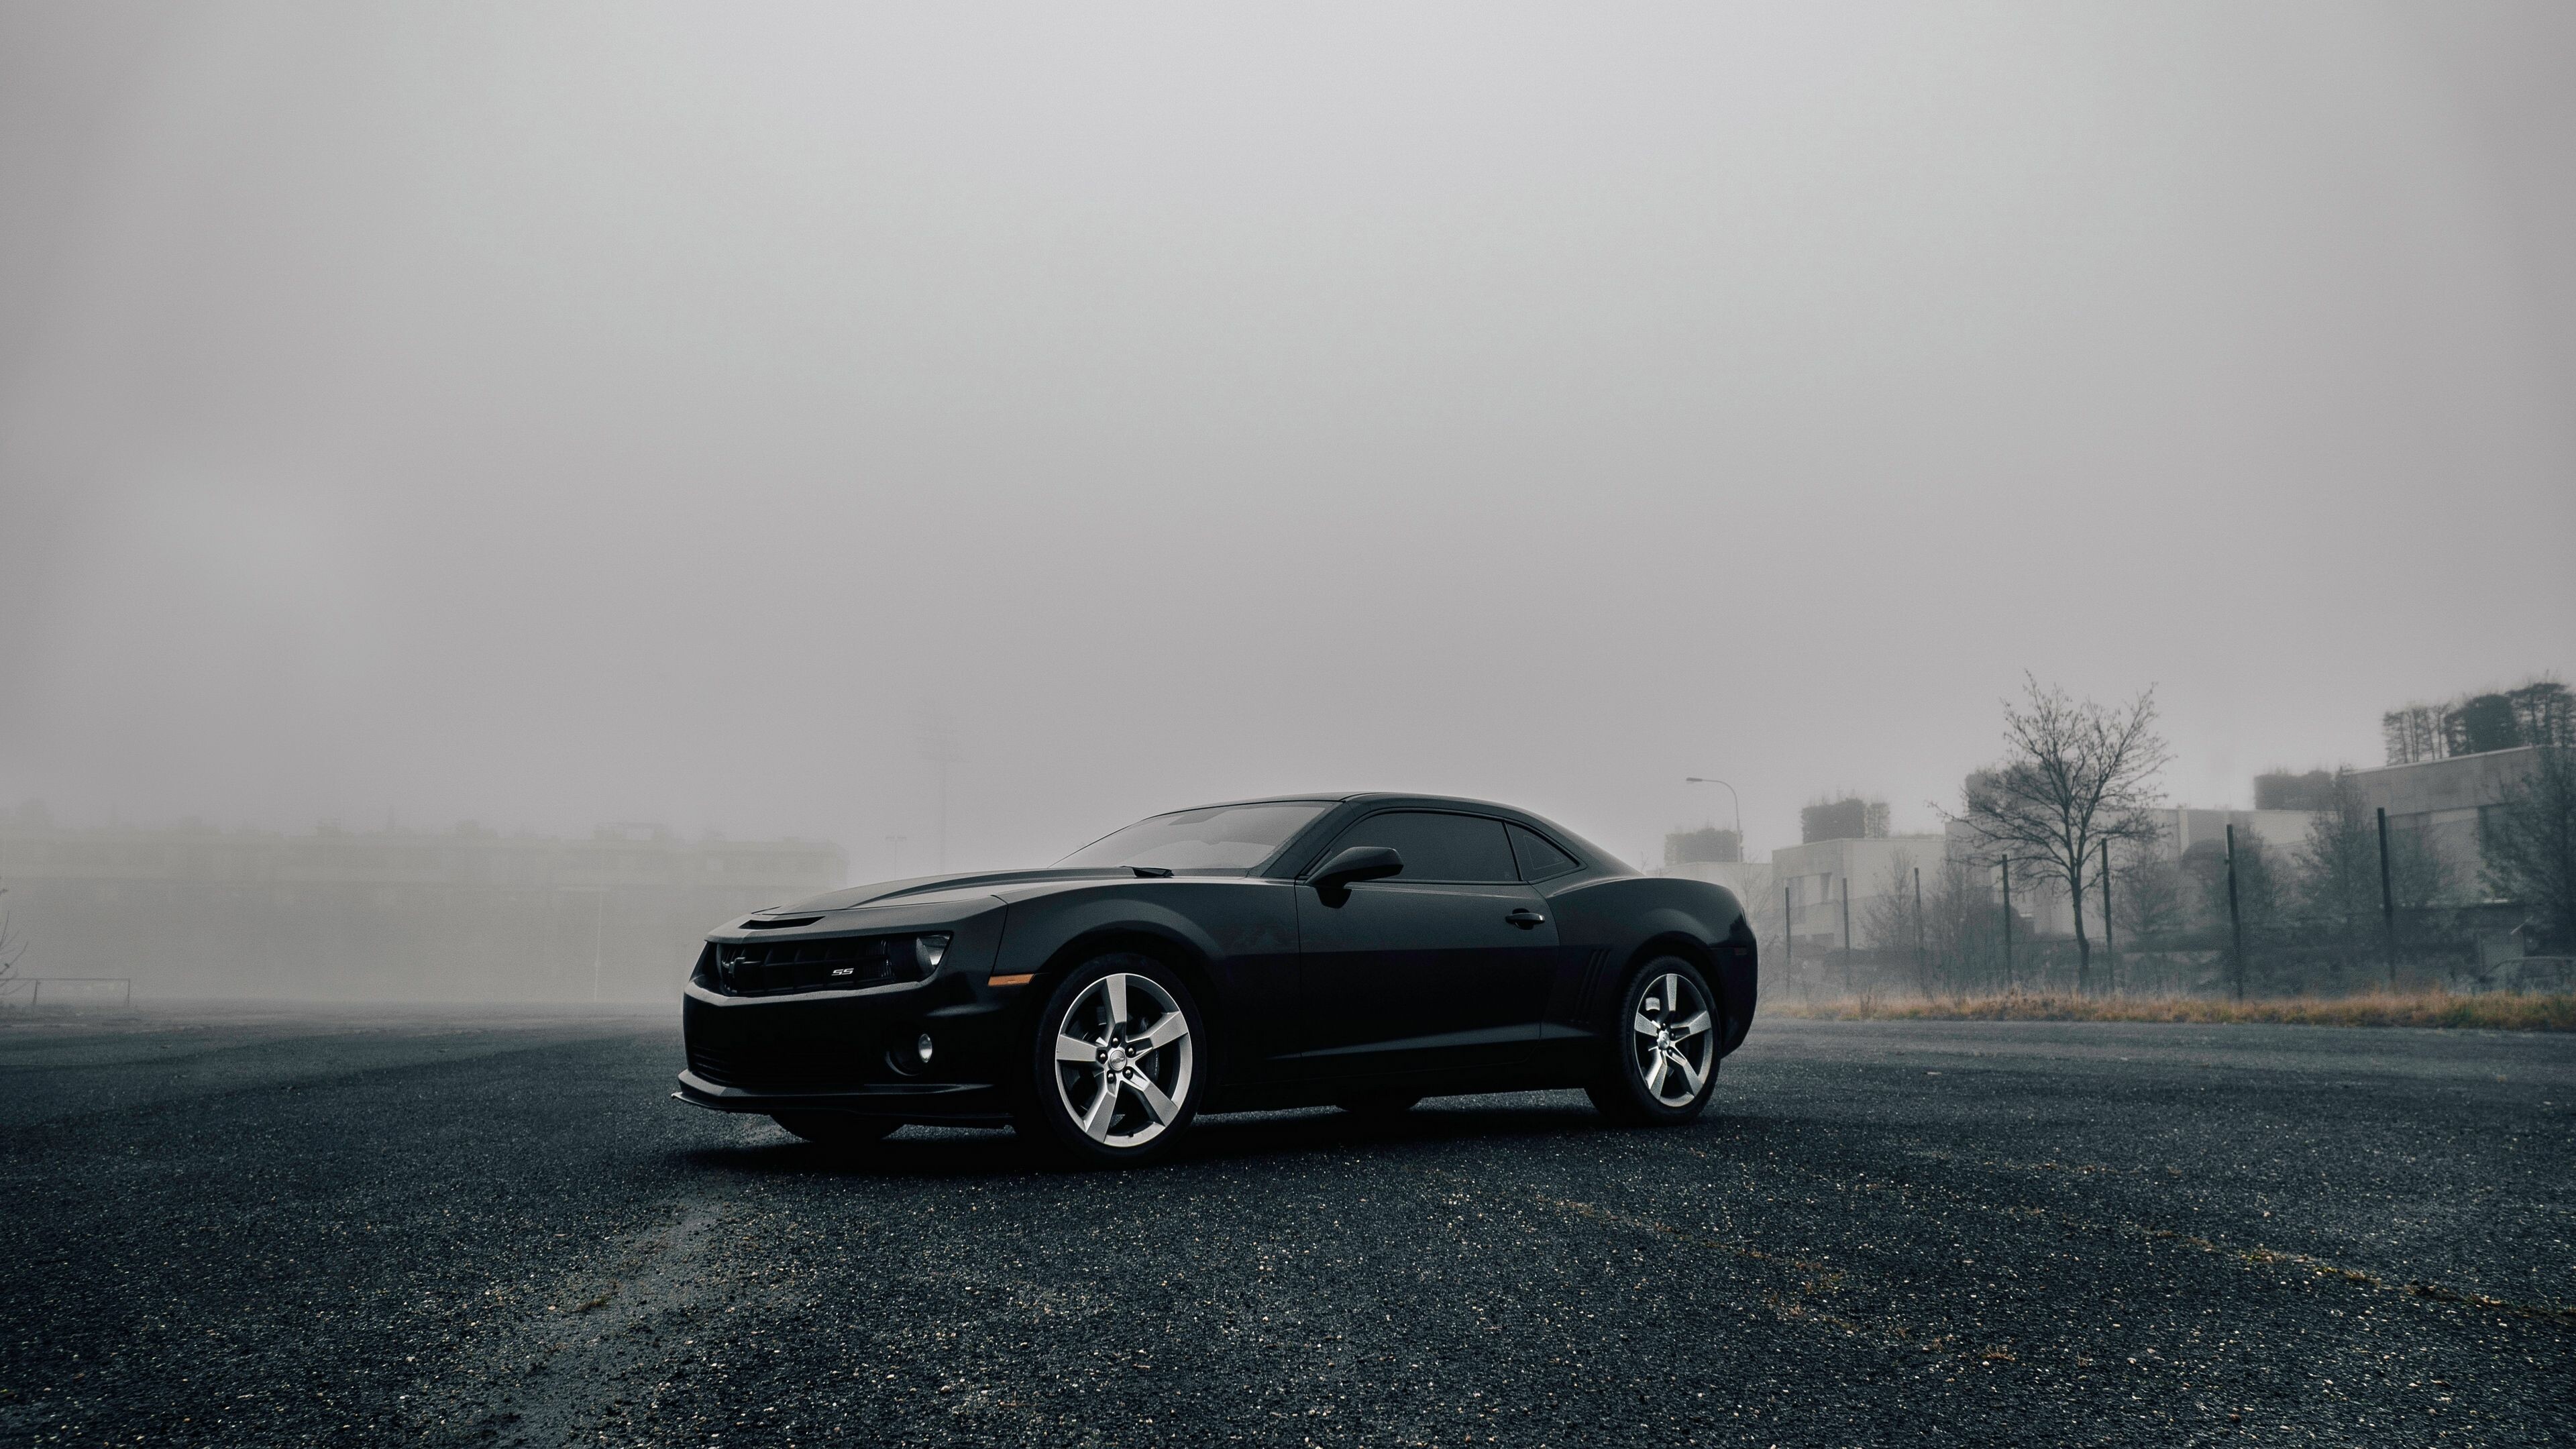 Chevrolet: Camaro, A mid-size American automobile, classified as a pony car. 3840x2160 4K Wallpaper.